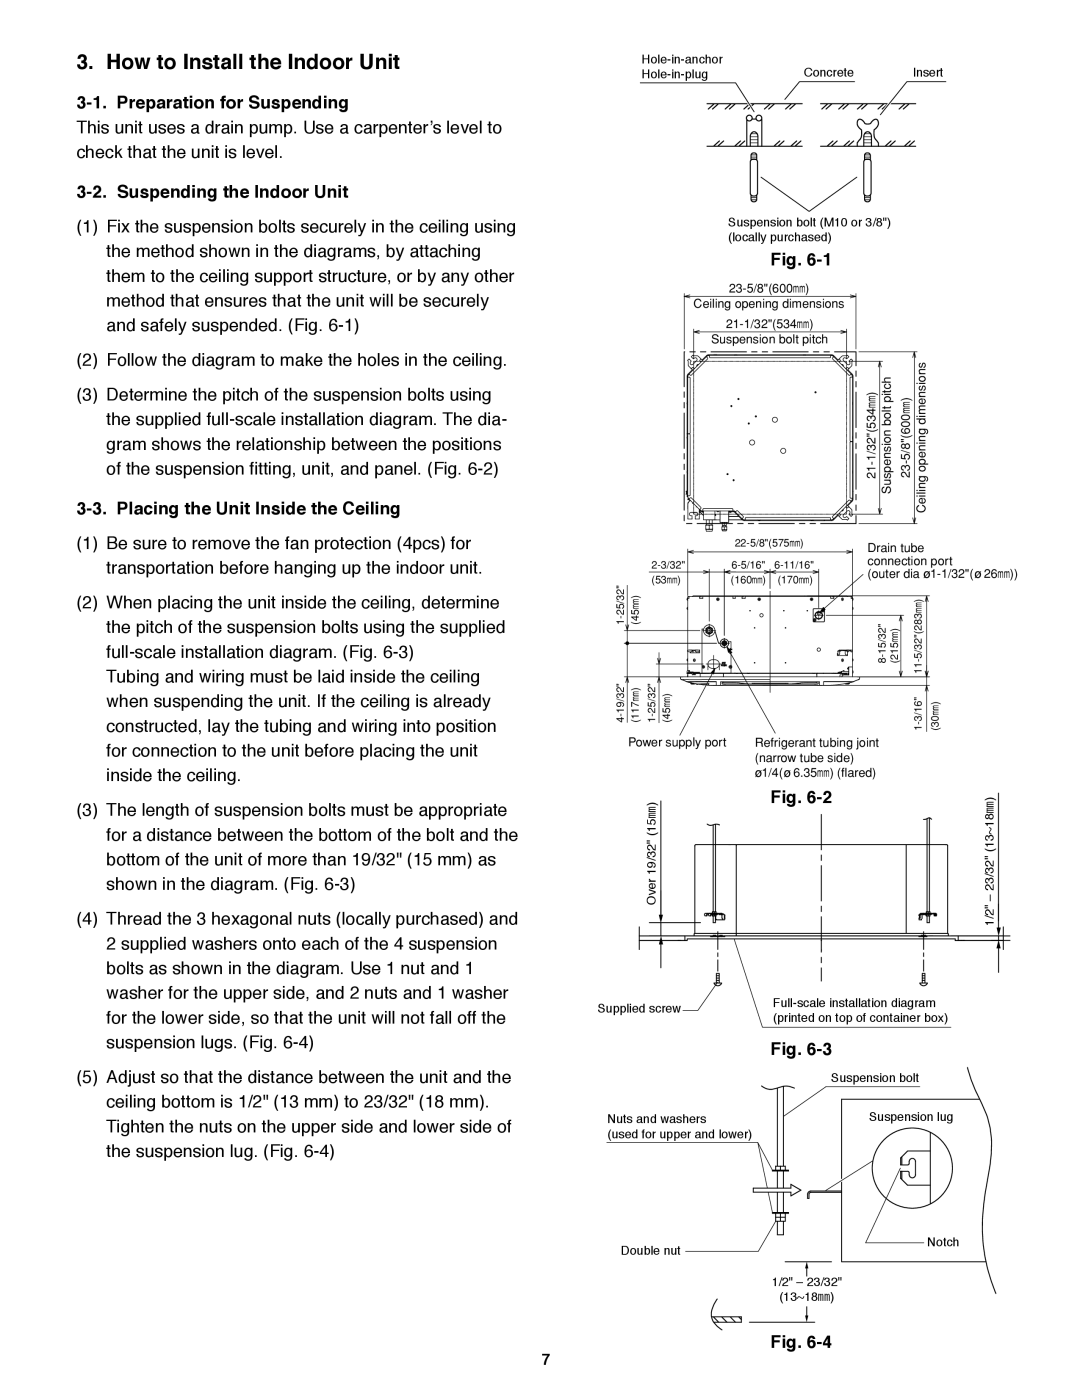 Panasonic R410A service manual How to Install the Indoor Unit, Preparation for Suspending, Suspending the Indoor Unit, Fig 